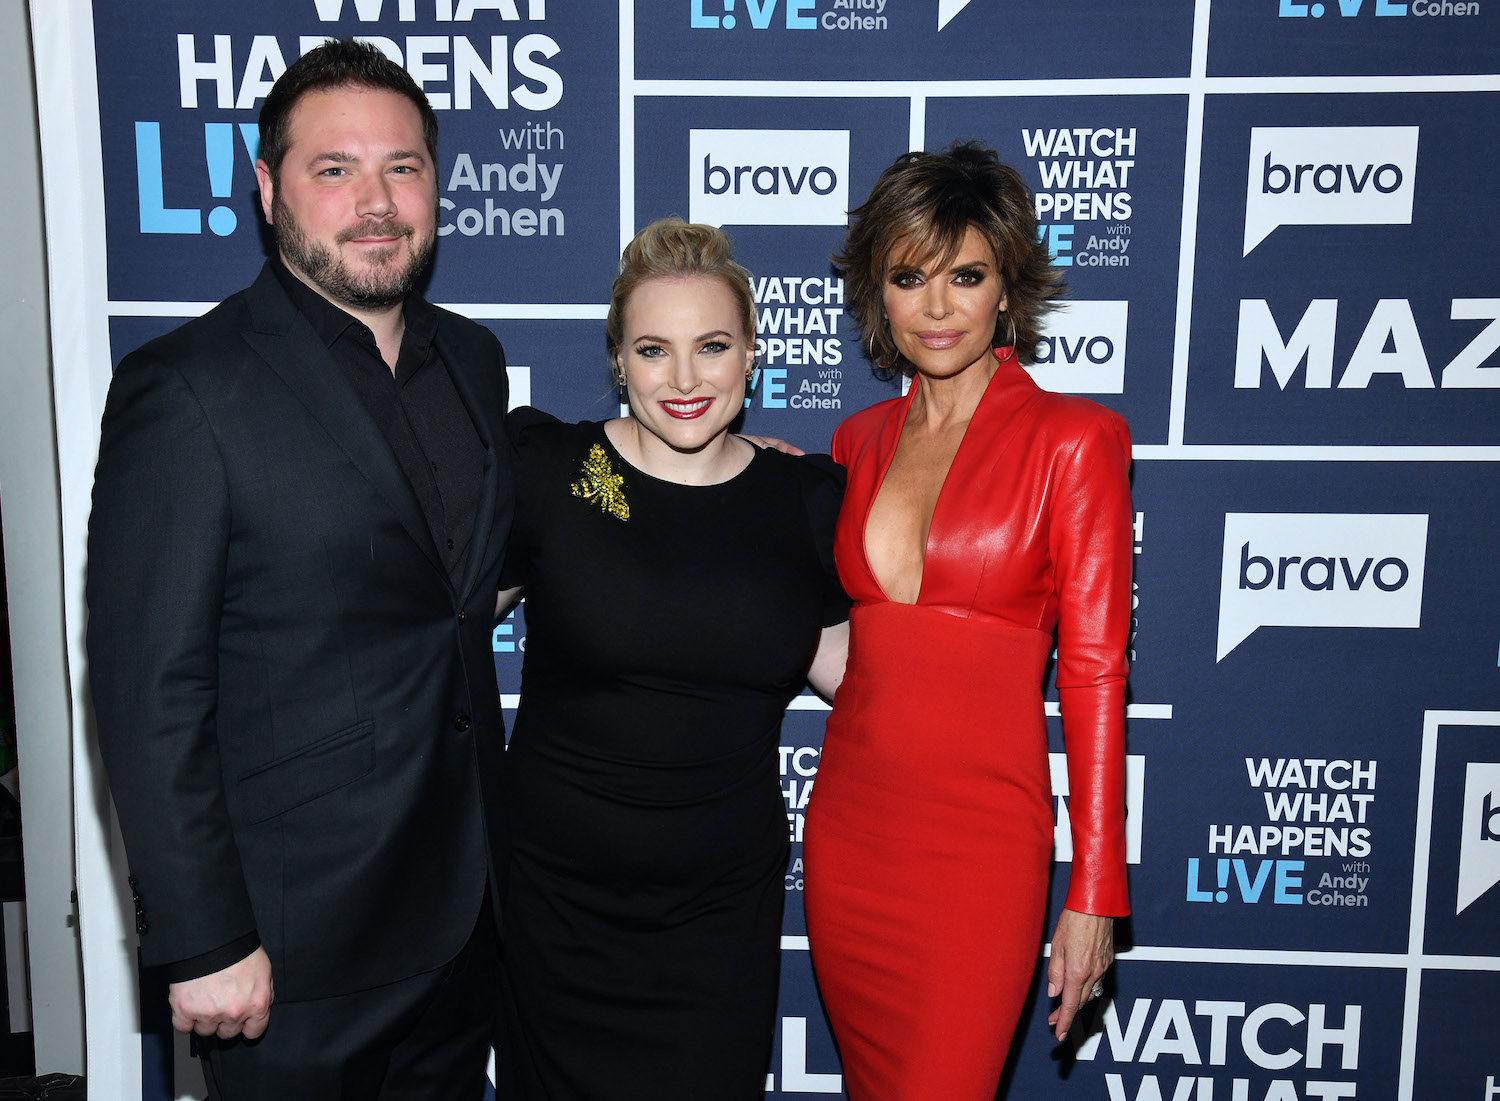 Ben Domenech, Meghan McCain, and Lisa Rinna on 'Watch What Happens Live'